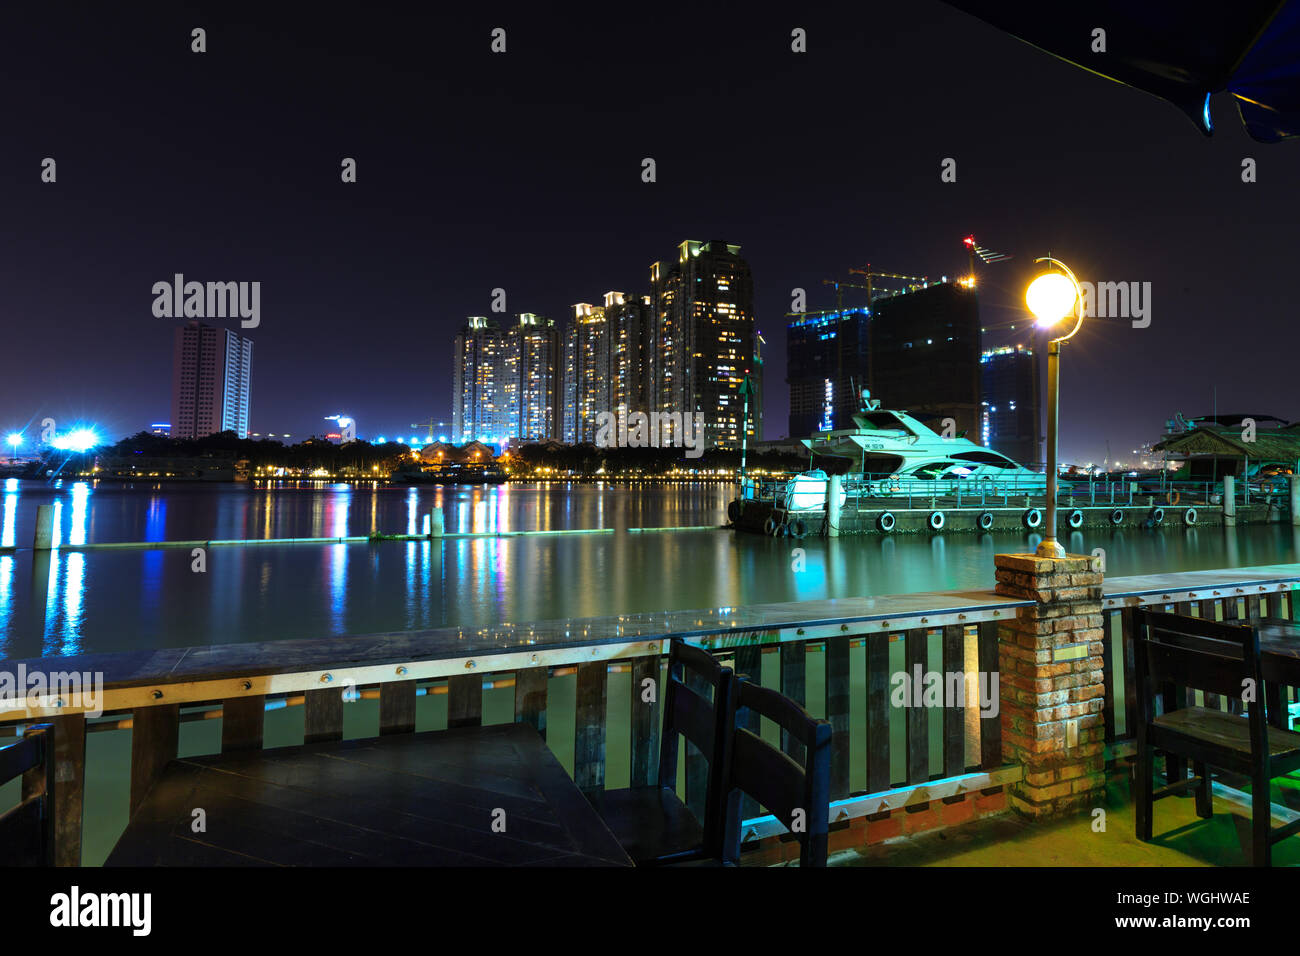 Restaurant By Saigon River With Illuminated City Buildings Seen In Background Stock Photo